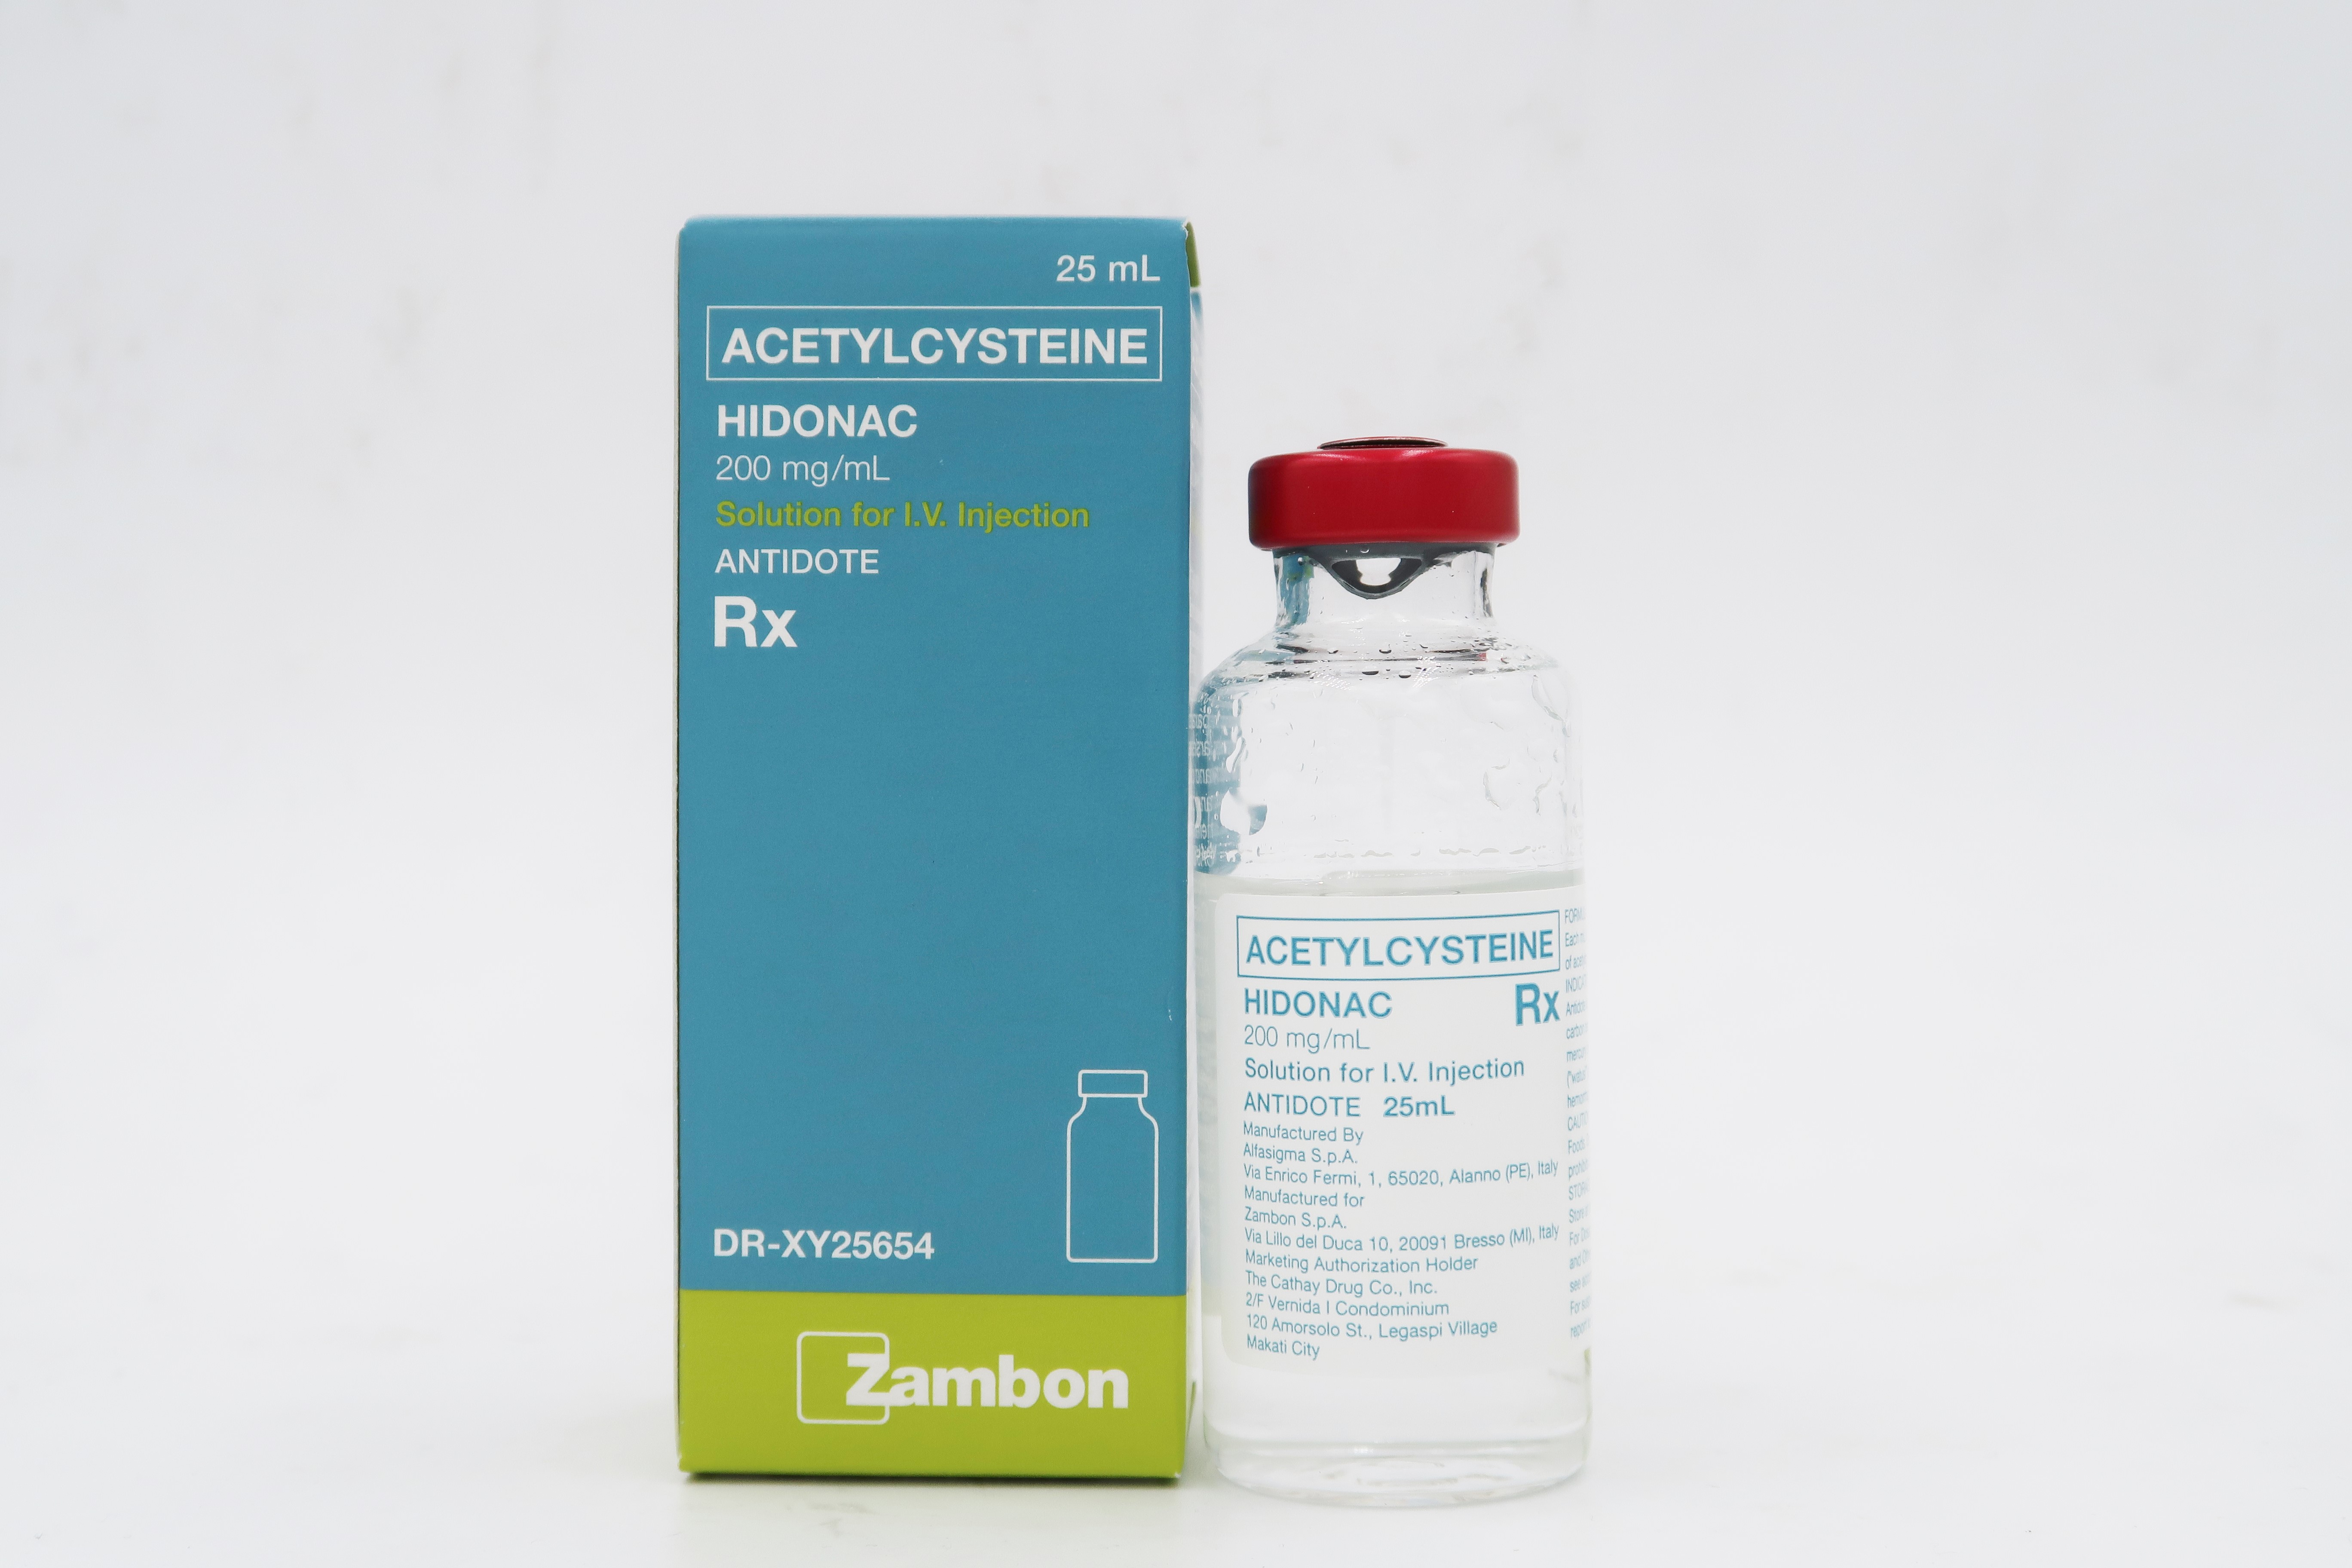 HIDONAC 25 mg/mL Solution for I.V. Injection   Cathay Drug